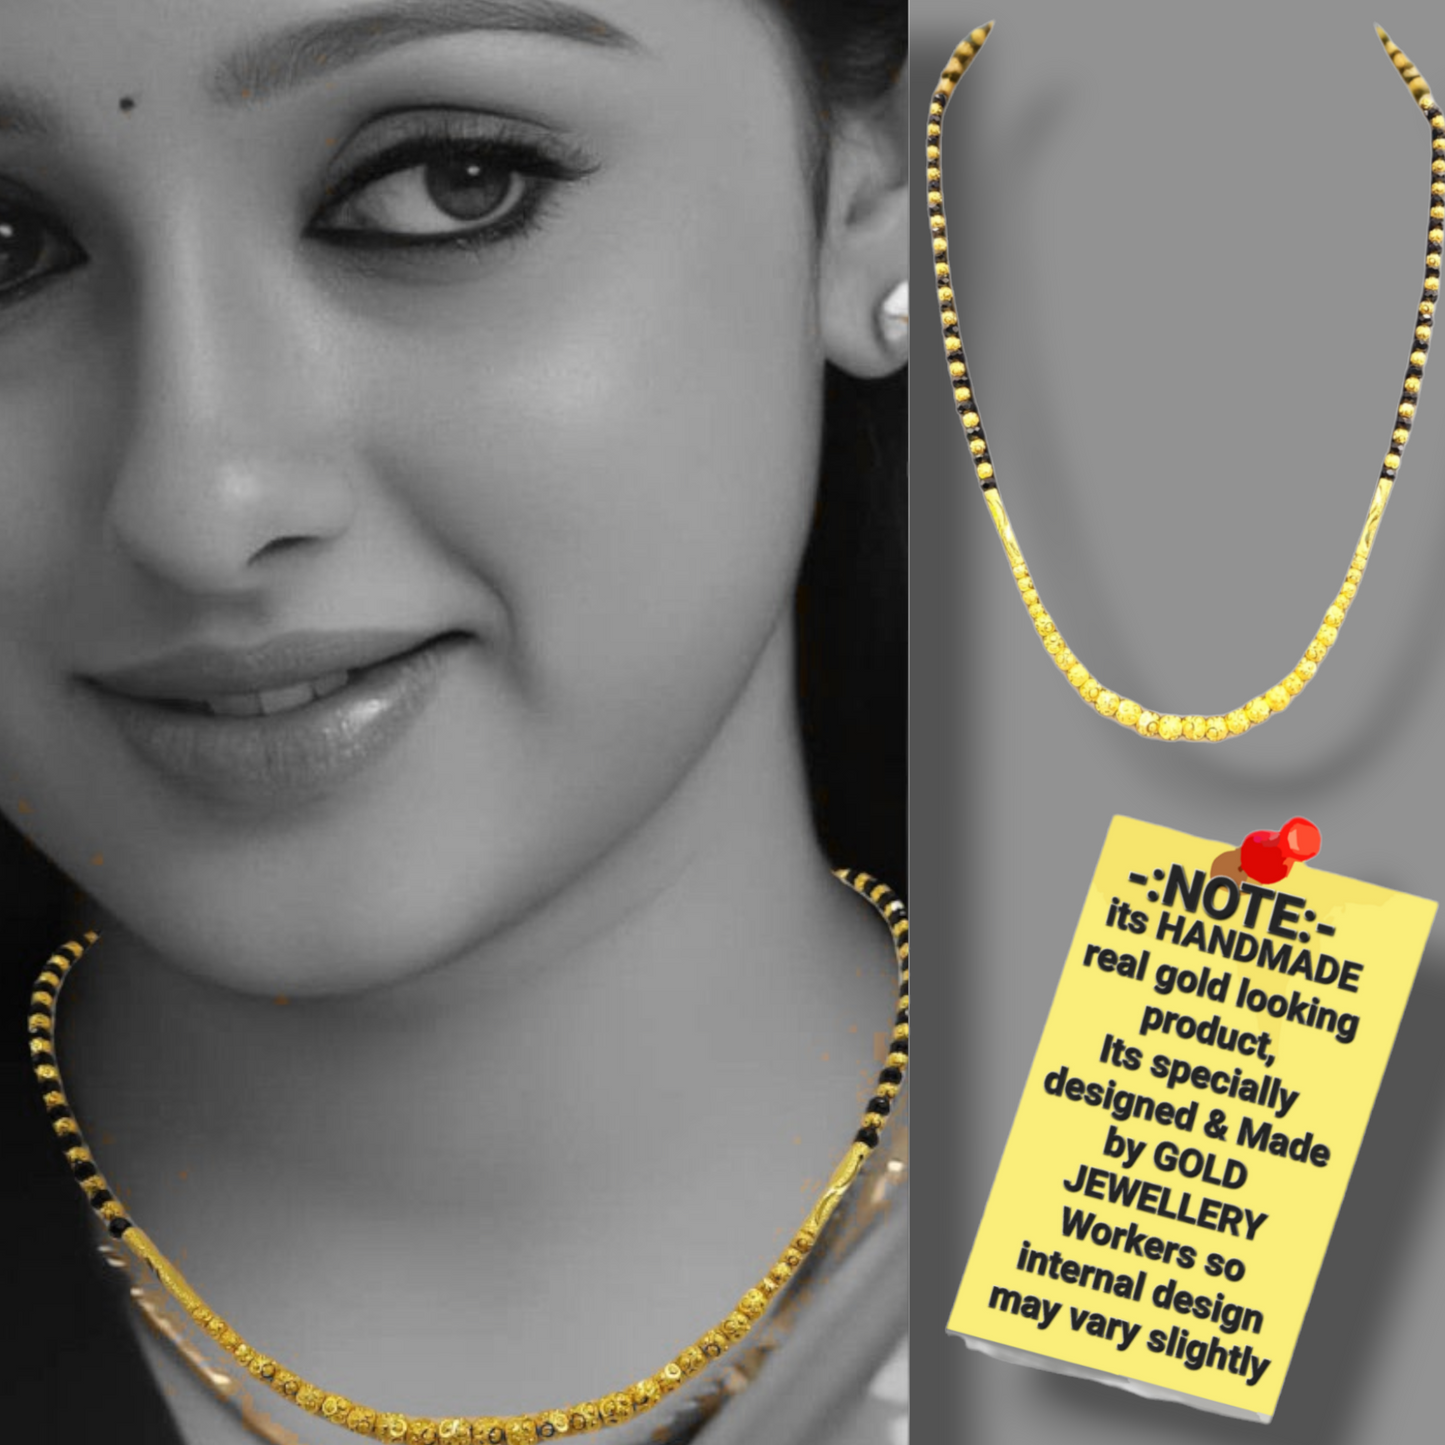 "Timeless Grace: Handmade Gold-Plated Mangalsutra with Black Beads"